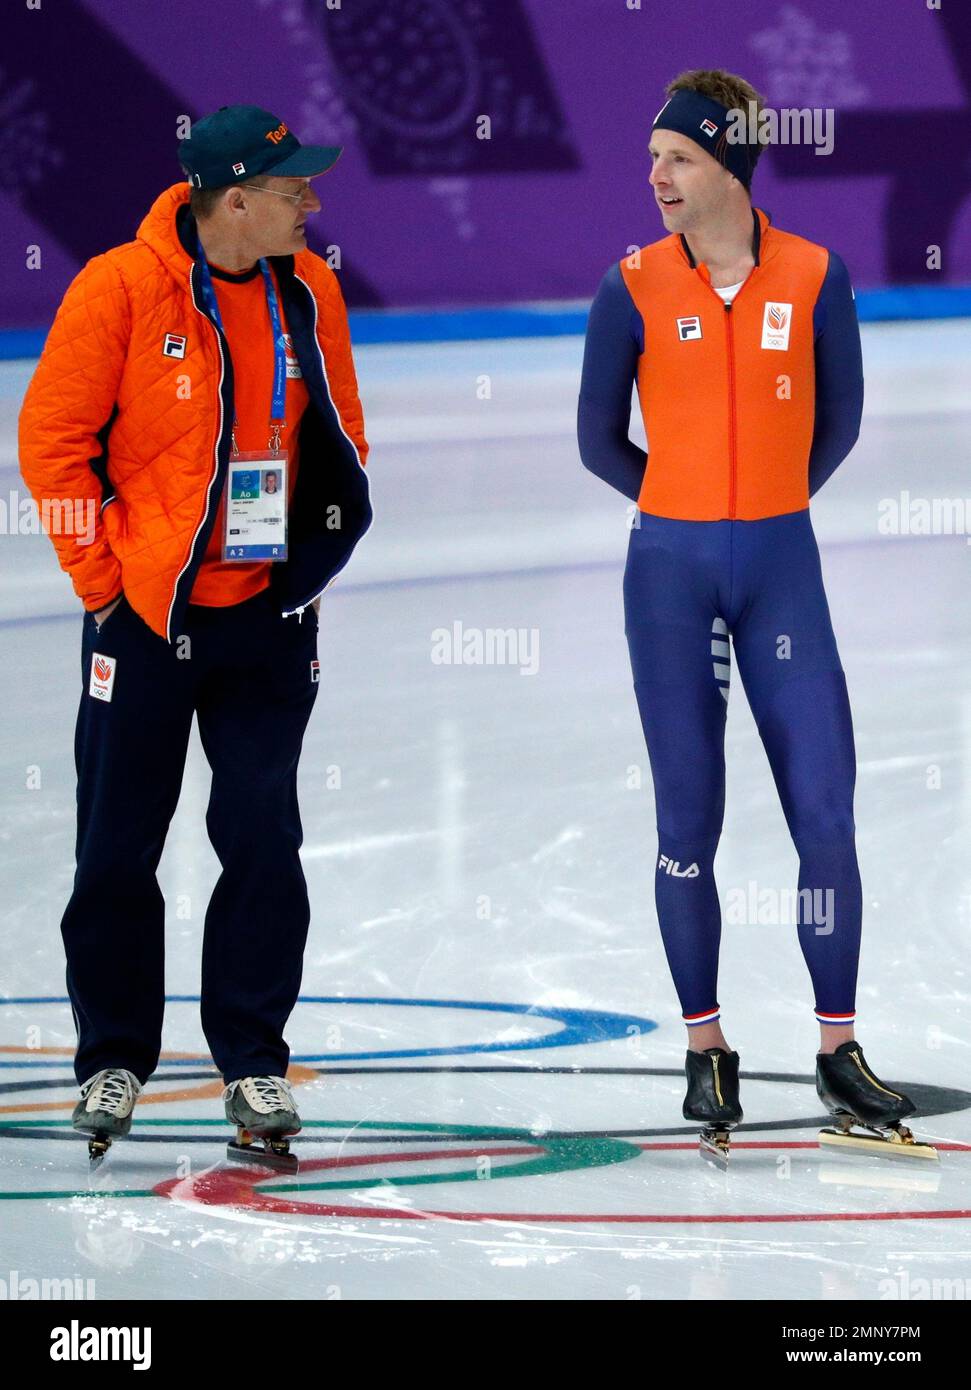 Bob de Vries of The Netherlands, right, talks to coach Jillert Anema, left,  of The Netherlands during the official training session for the men's 5,000  meters race at the Gangneung Oval at